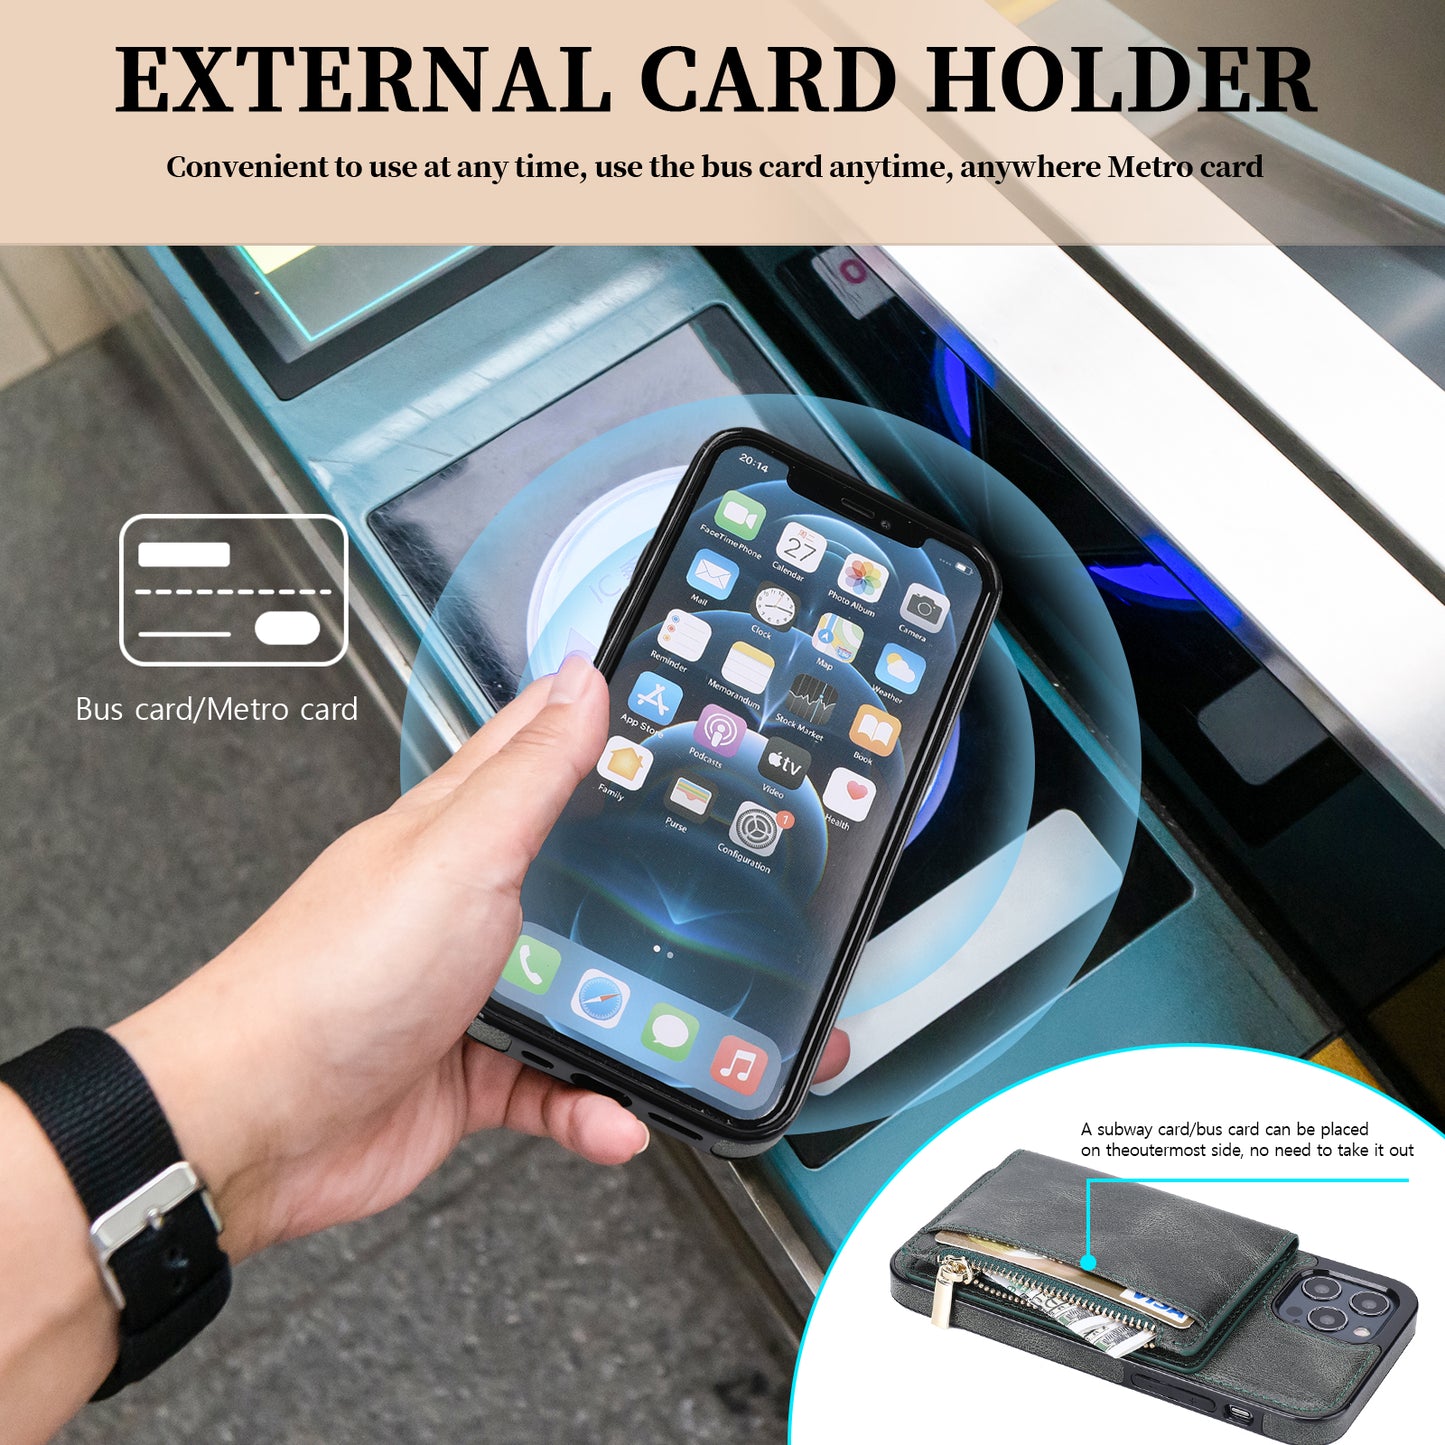 Apple iPhone 12 Pro Max Leather Cover Multifuntional Wallet External Card Holder Kickstand TPU Zipper